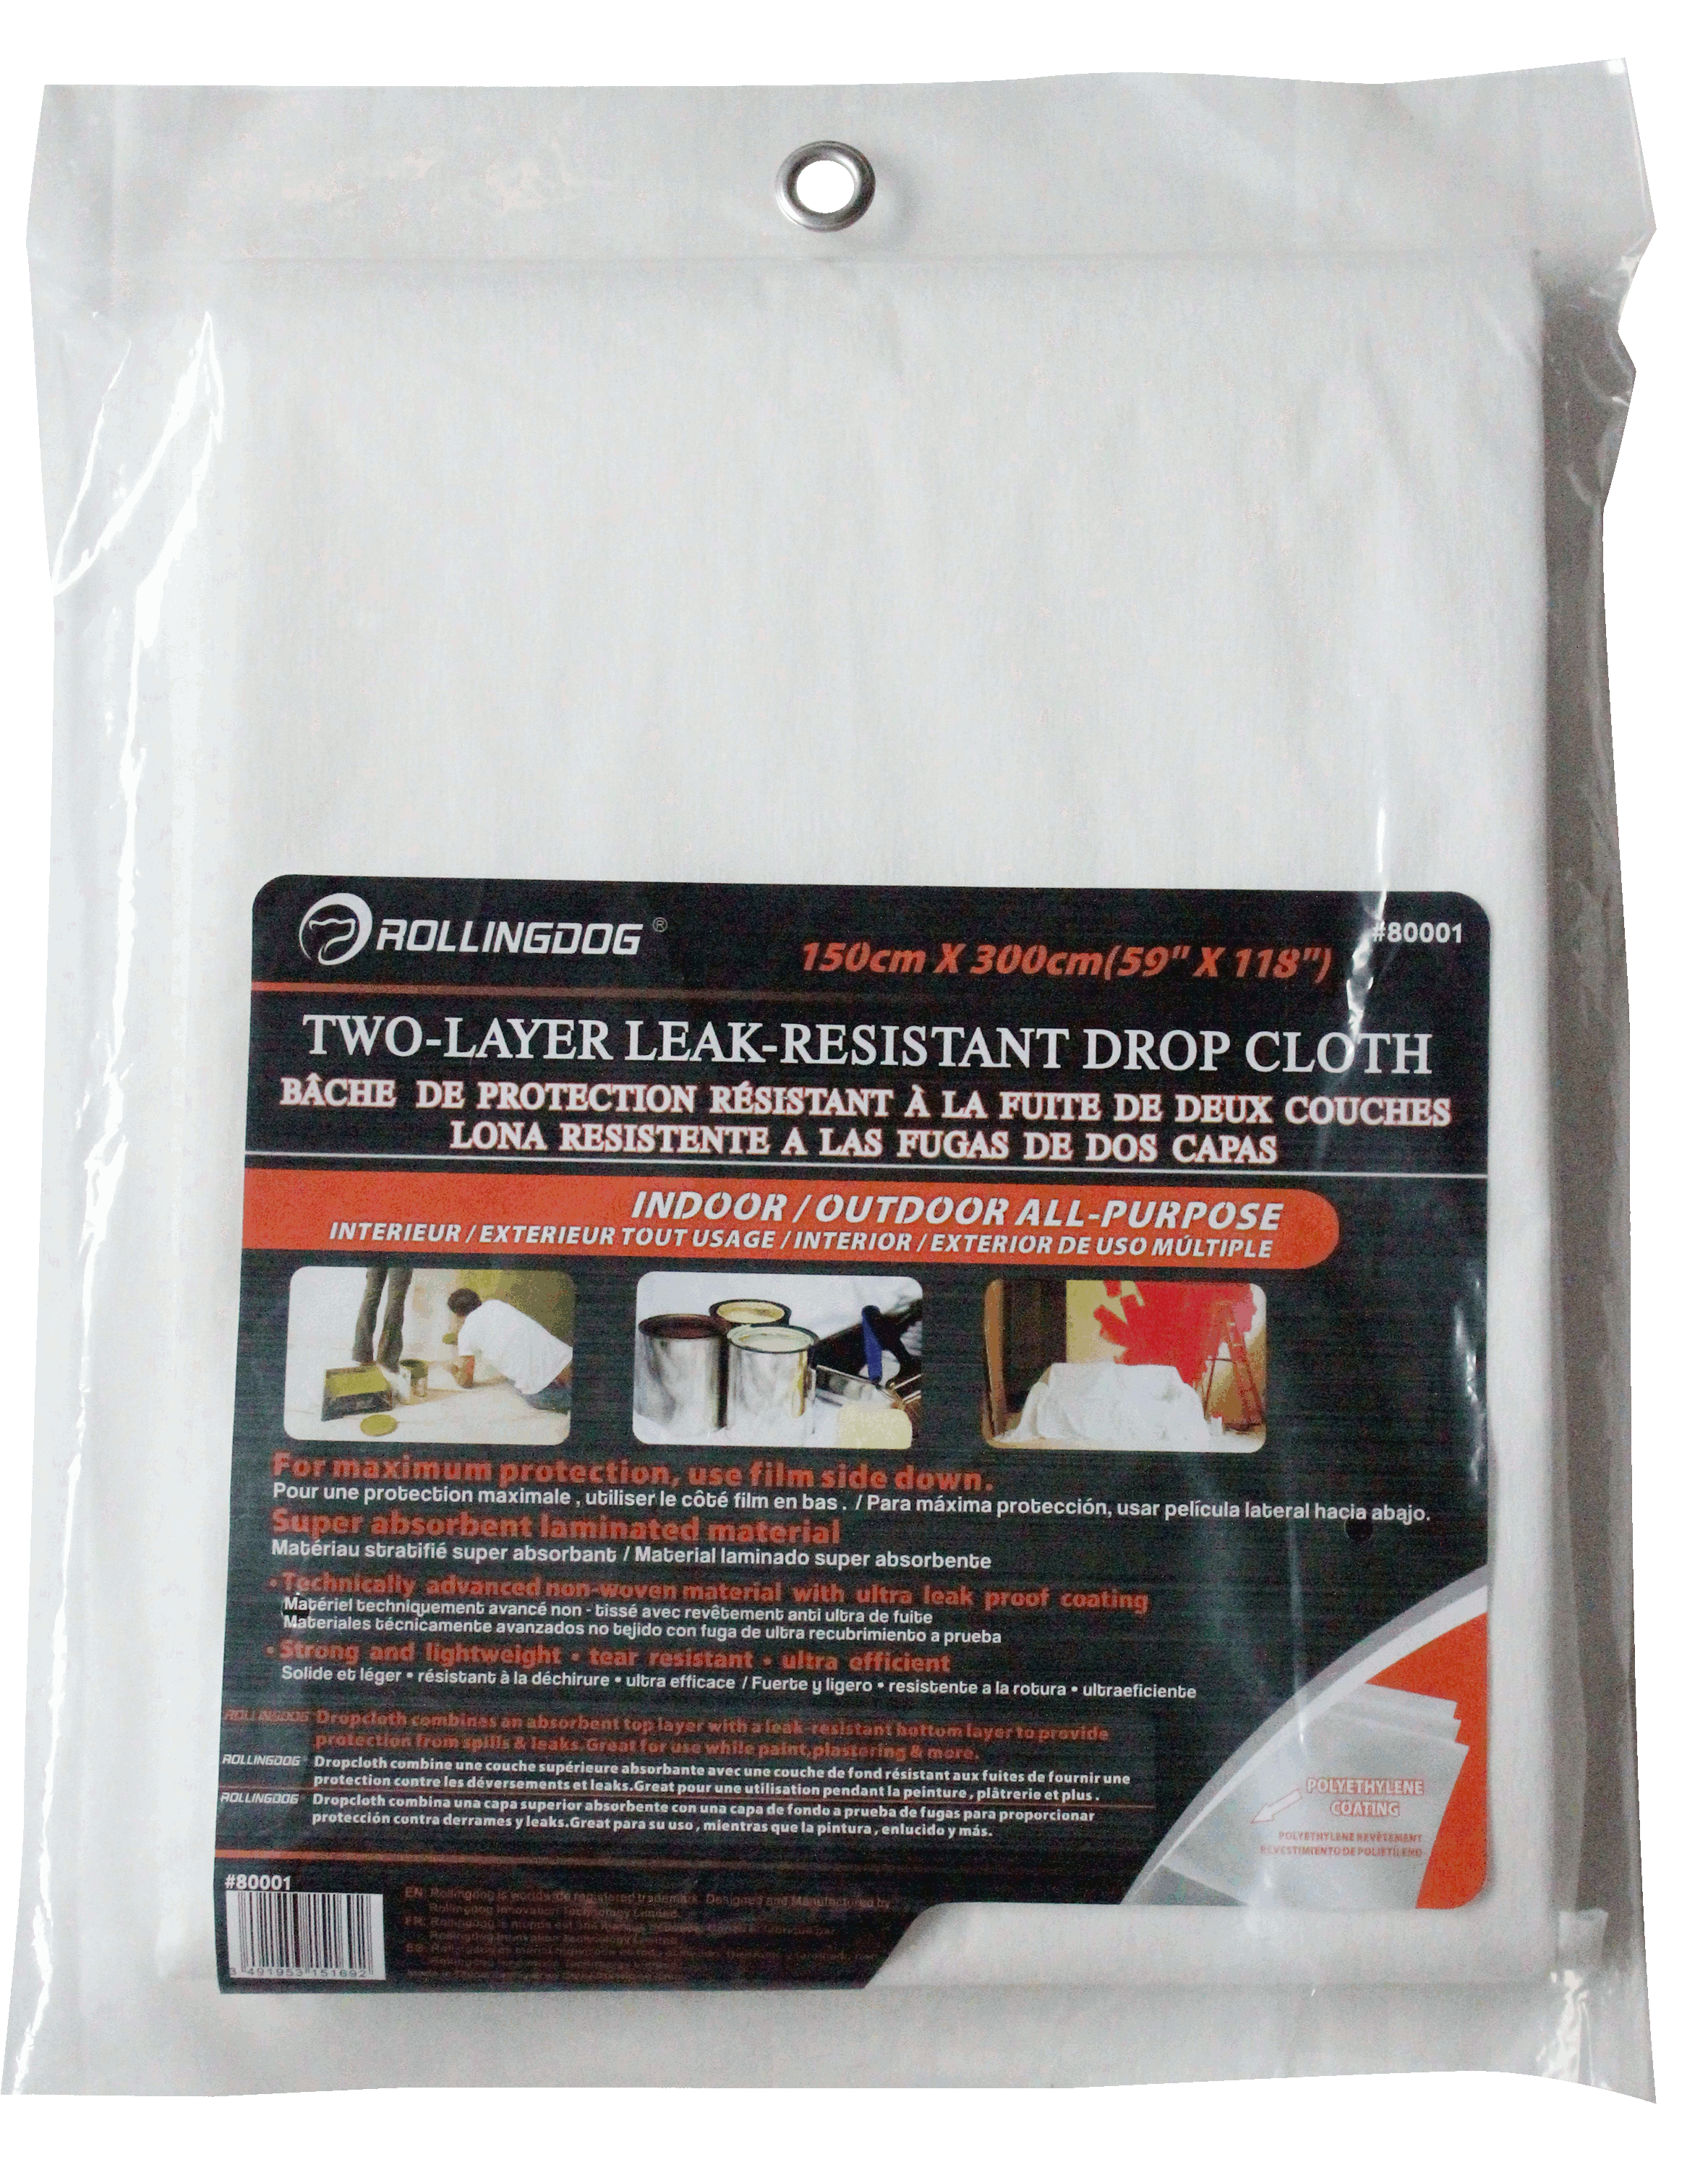 Two-Layer Leak-Resistant Drop Cloth Size: 150cm x 300cm(59"x118") Weight:255g Color: White                                                                                                              